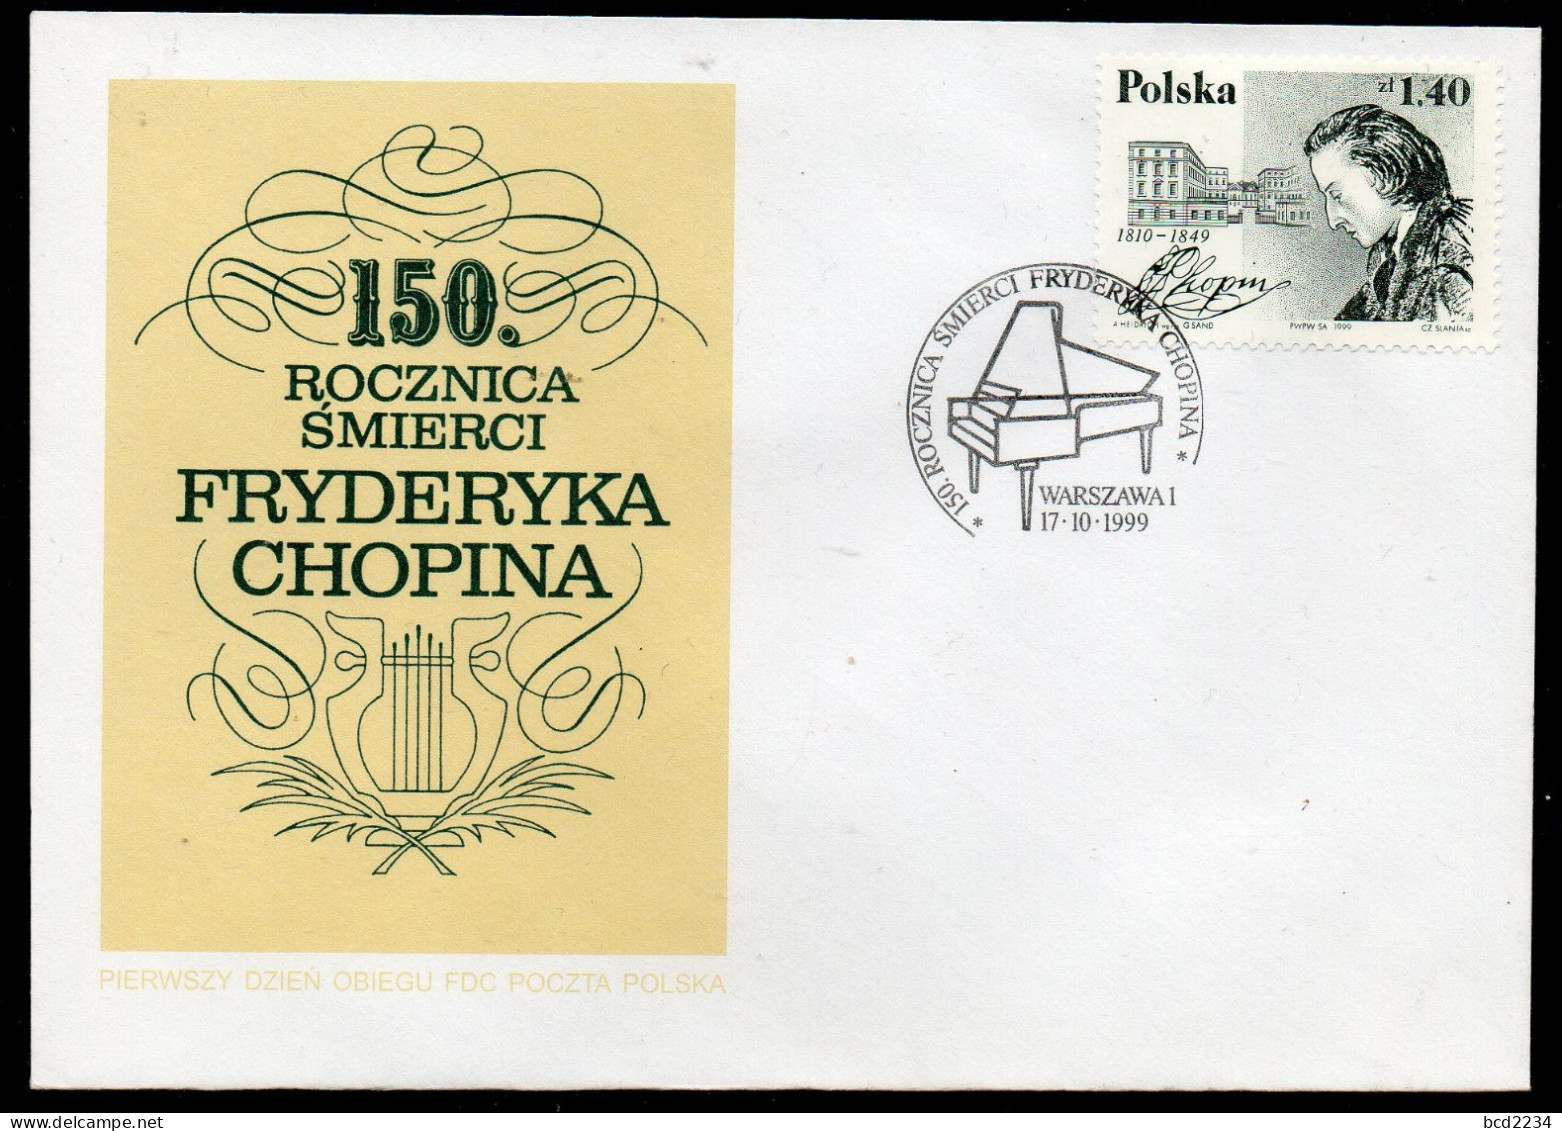 POLAND FRANCE SLANIA 1999 CHOPIN JOINT ISSUE FDC 150TH DEATH ANNIVERSARY COMPOSERS MUSIC PIANO POLISH FRENCH - Muziek